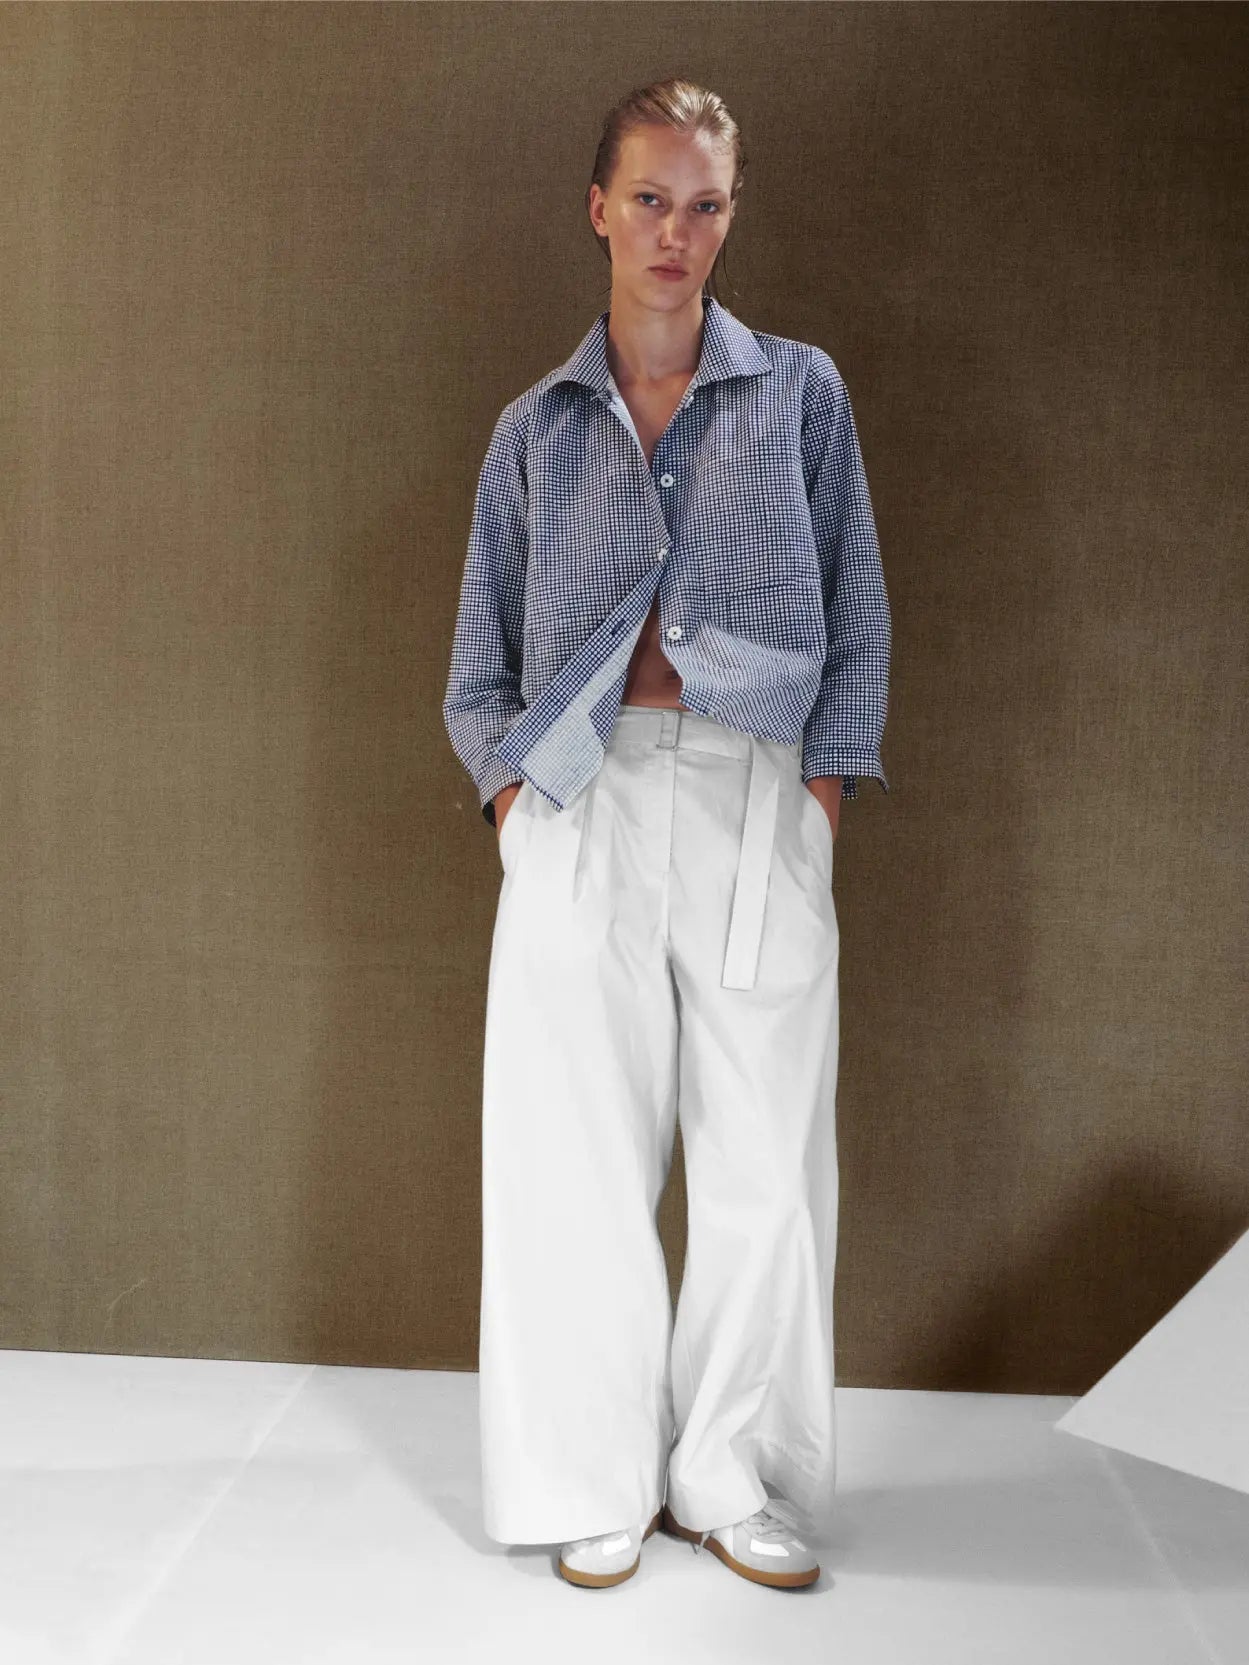 A pair of Rachel Pants Natural by Jan Machenhauer with a fabric belt at the waist, shown against a plain white background. Available exclusively at Bassalstore in Barcelona, the pants feature a minimalist design with subtle pleats and clean lines.